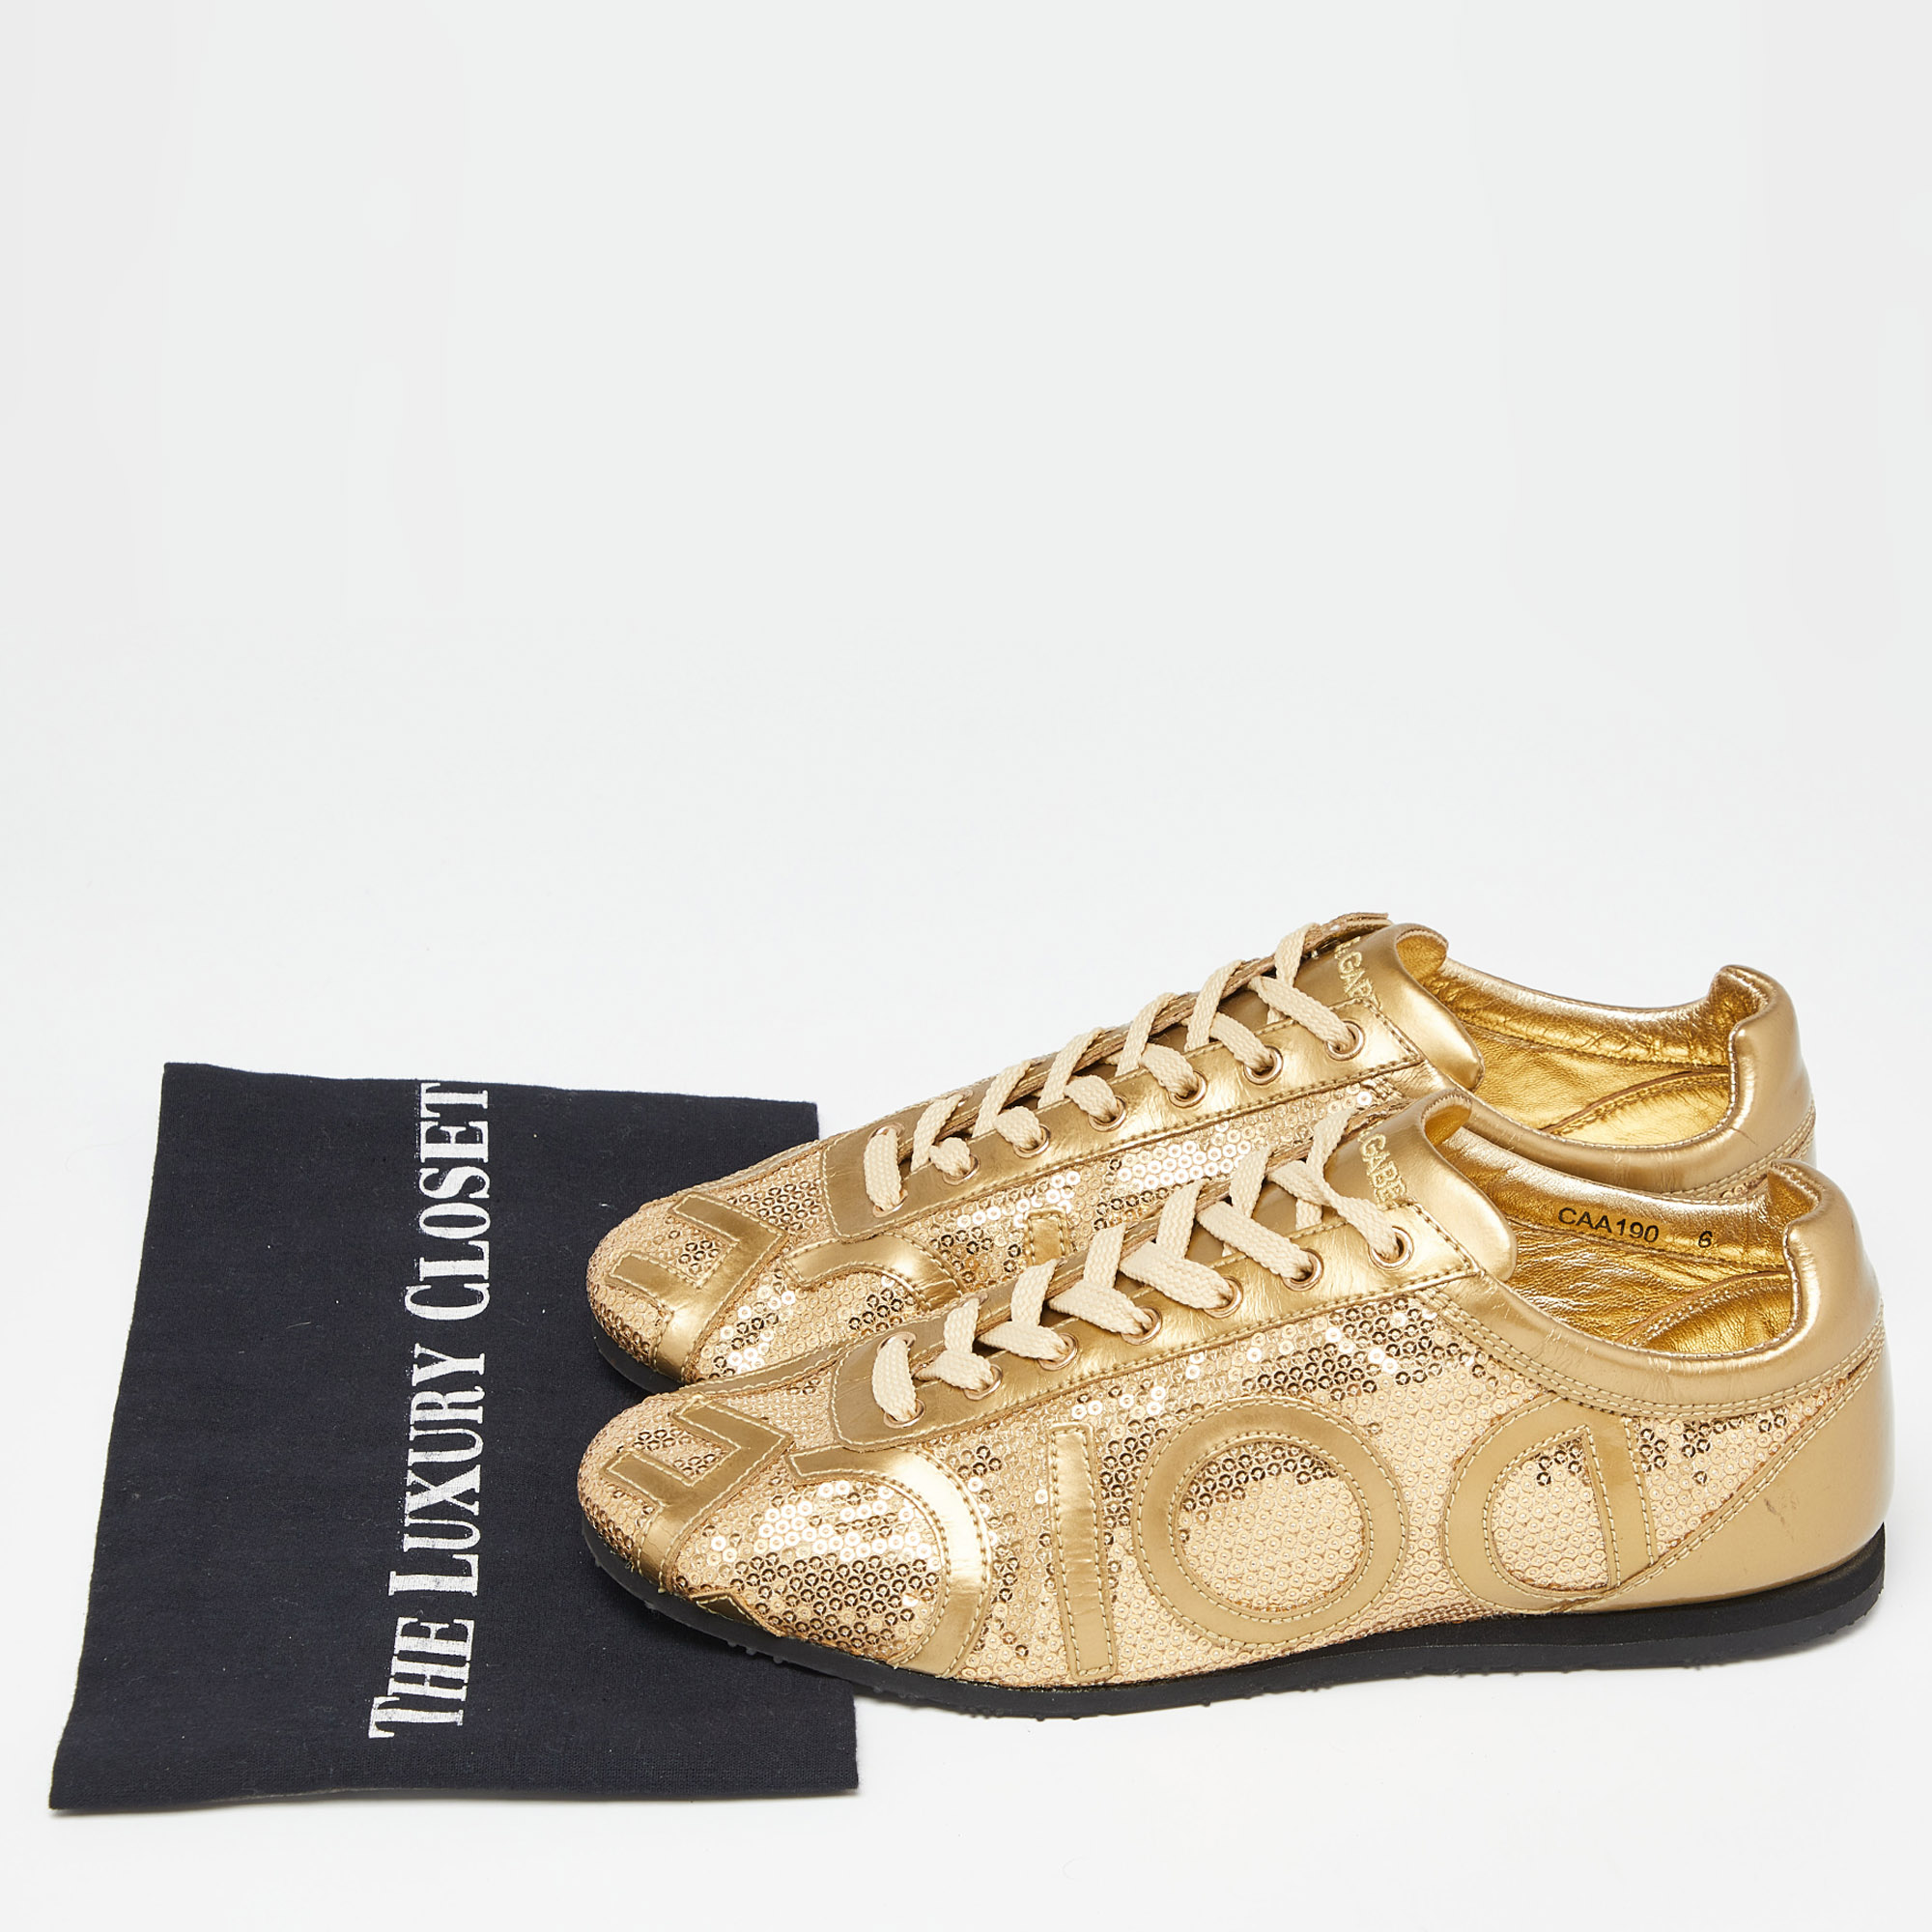 Dolce & Gabbana Gold Patent Leather And Sequin Embellished Low Top Sneakers Size 40